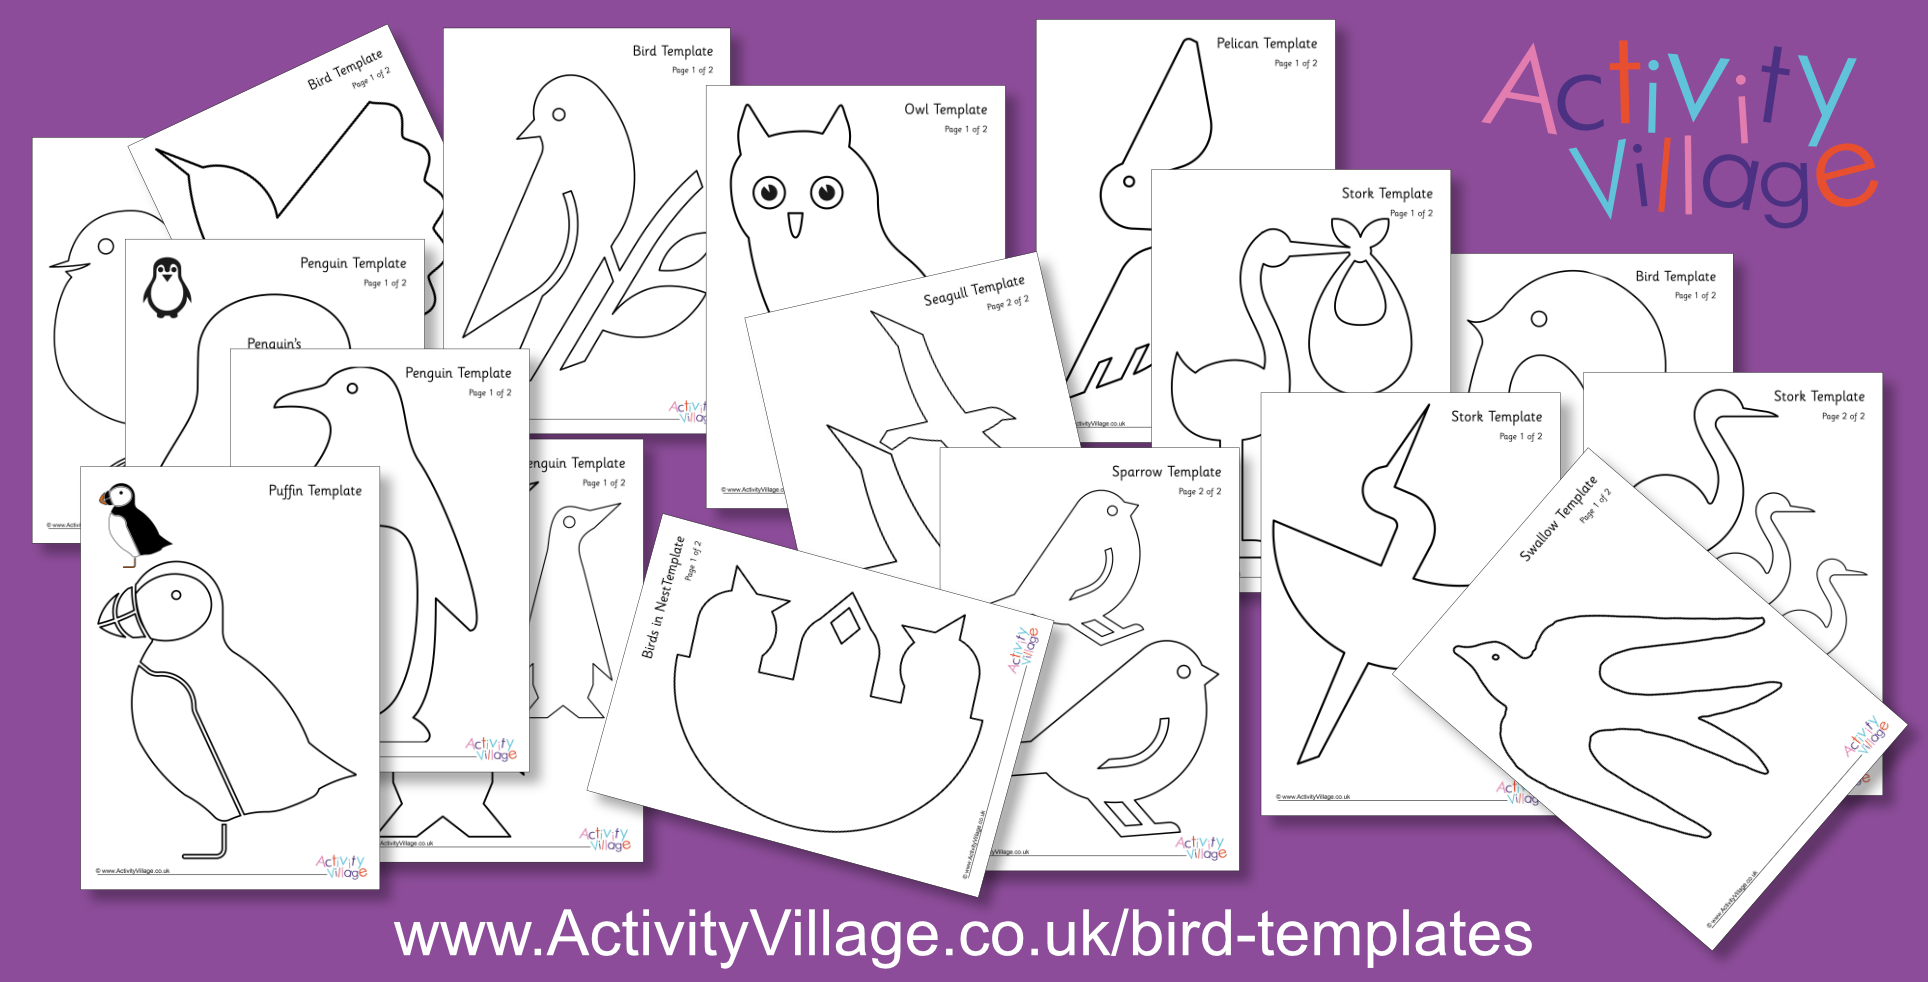 New Bird Templates for Crafty Projects